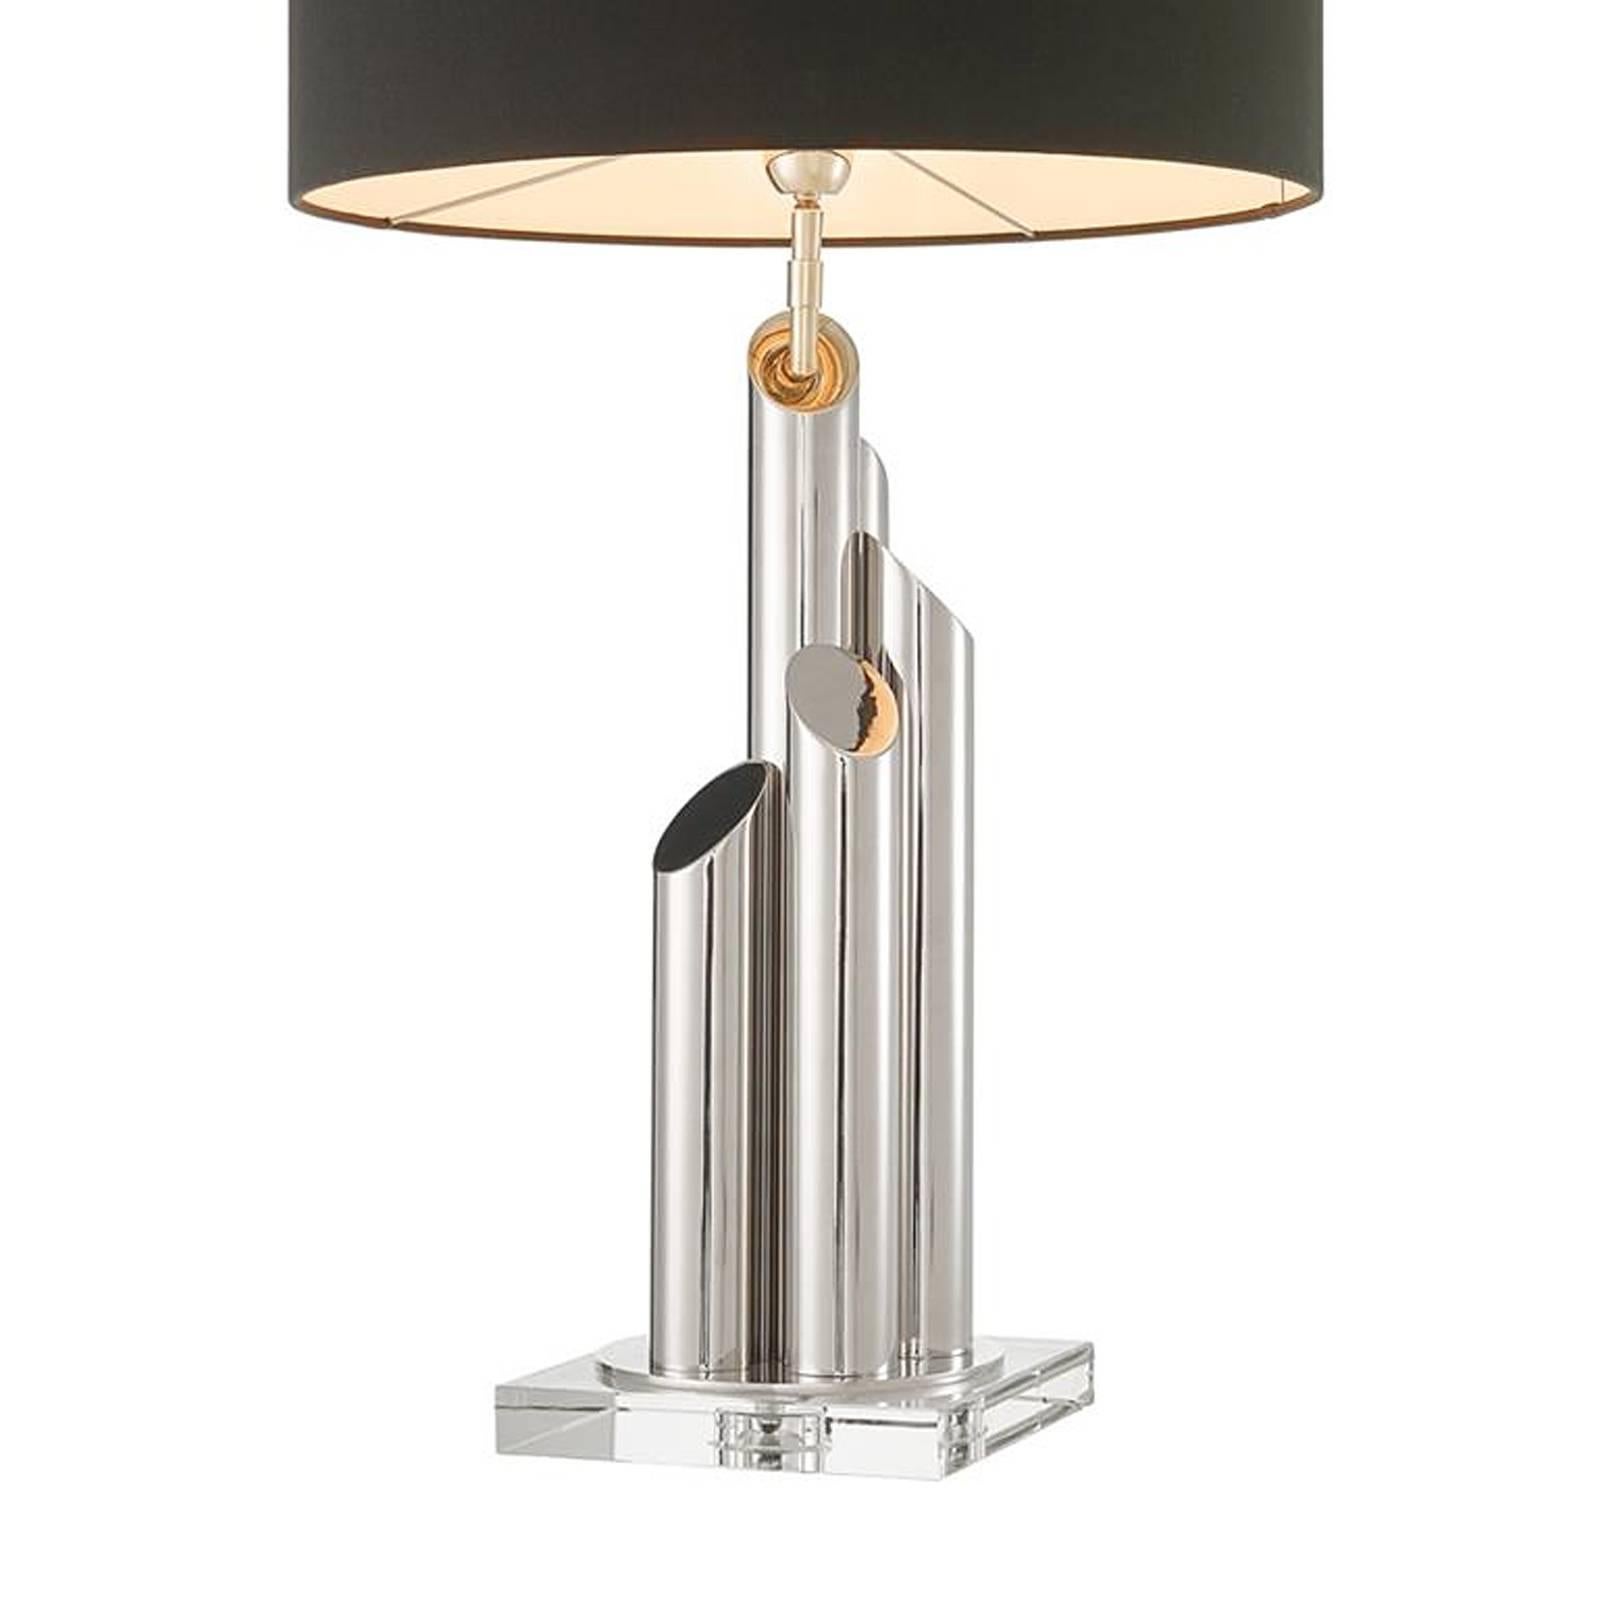 Glazed Tubes Nickel Table Lamp in Nickel Finish on Crystal Glass Base